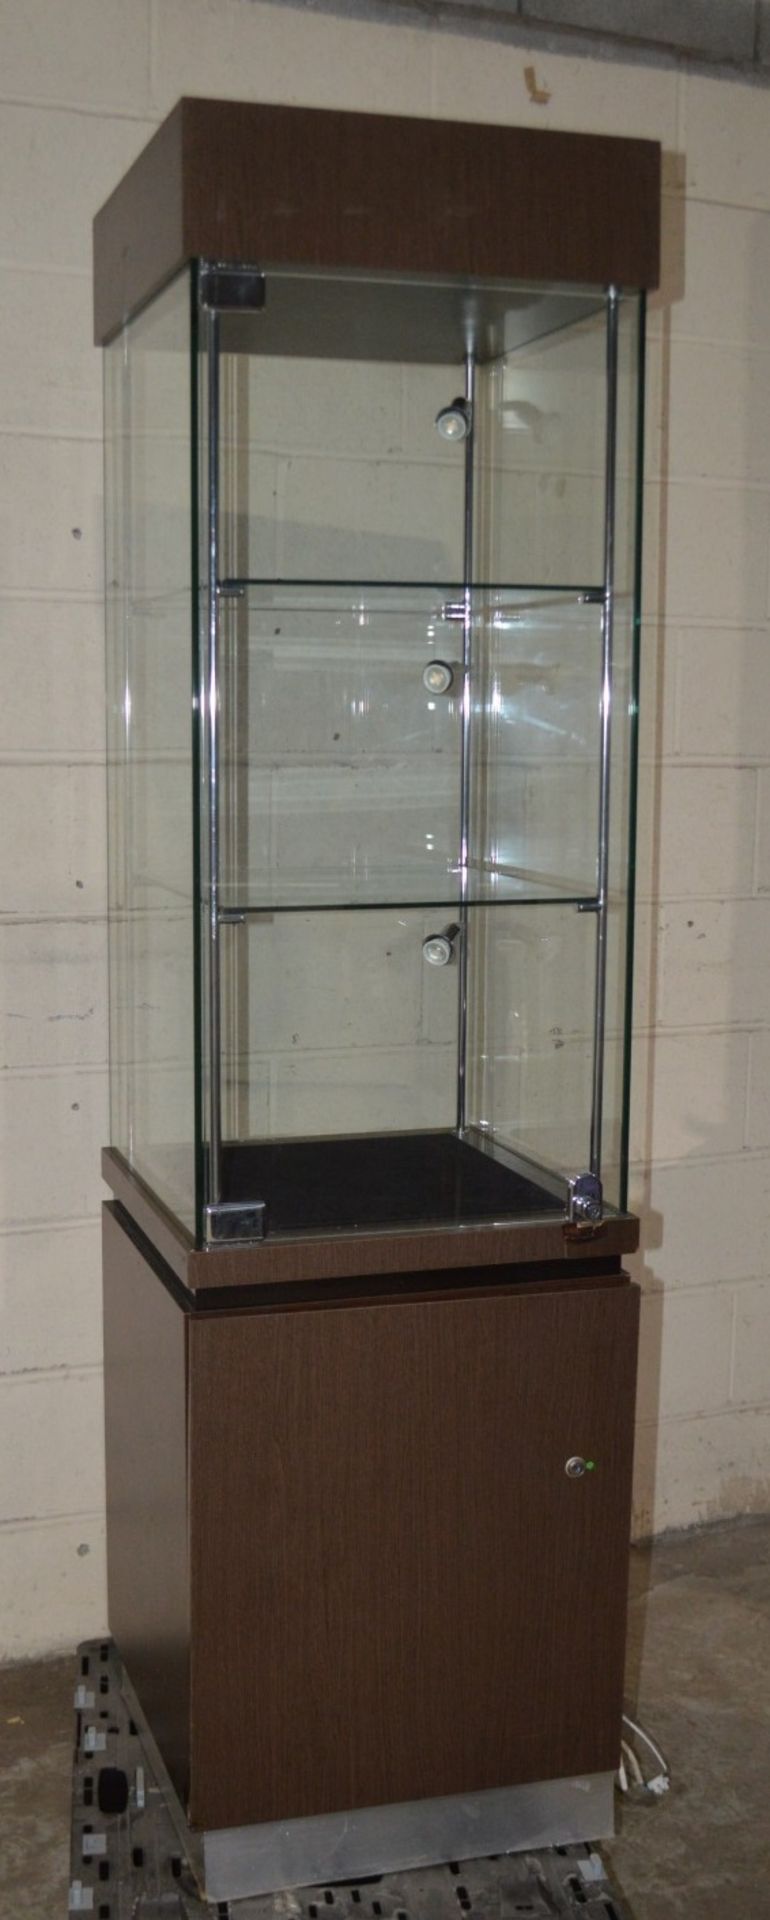 1 x Lockable Illuminated Display Case - Dimensions: H186 x W50 x D50cm - Unlocked, Without Key - Image 3 of 6